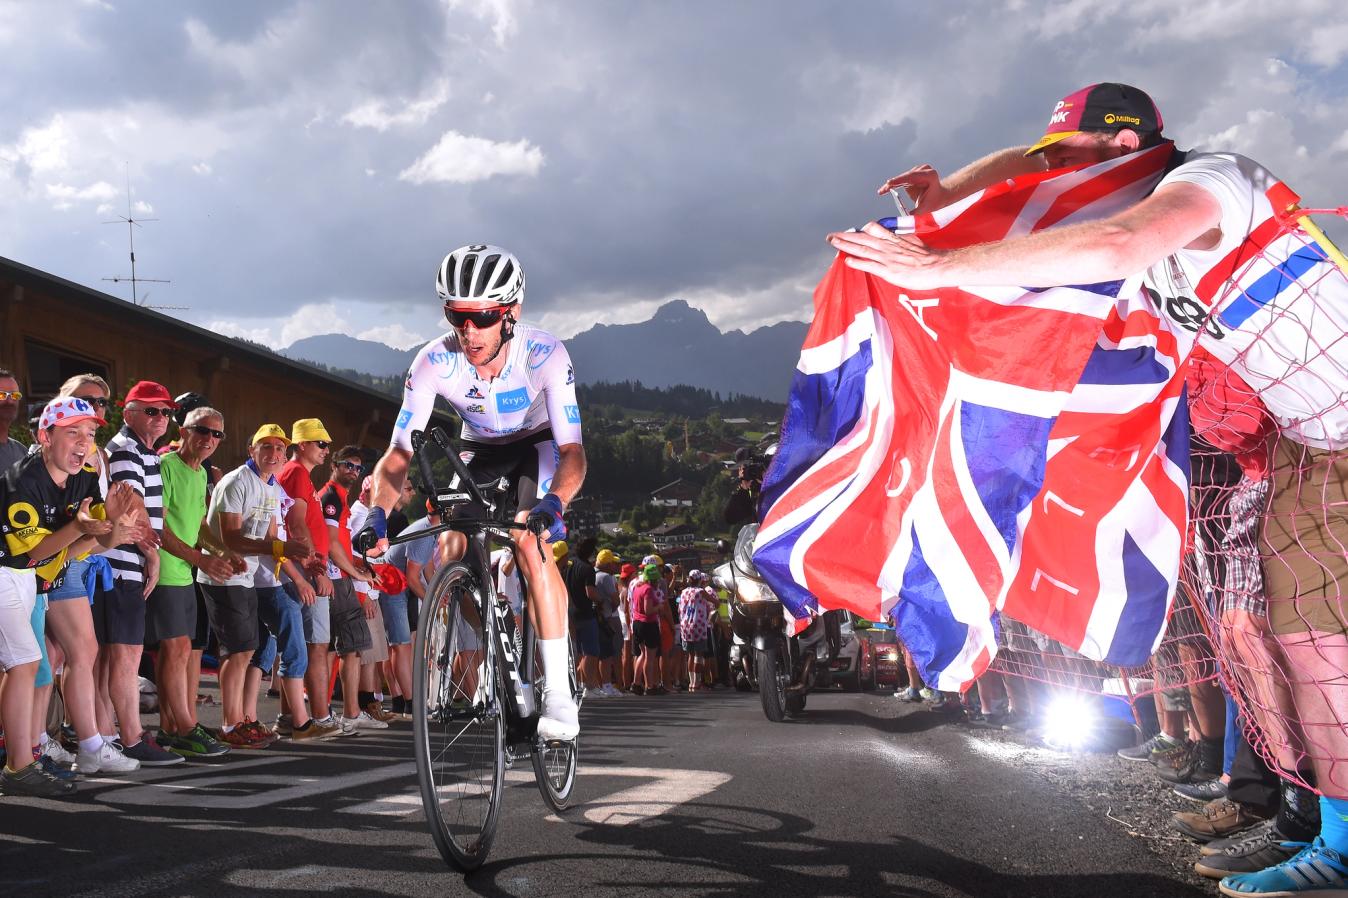 Next year will mark eight years since Adam Yates finished fourth at the Tour de France, but there remains much hope that the man from Bury can become Great Britain's latest Grand Tour winner